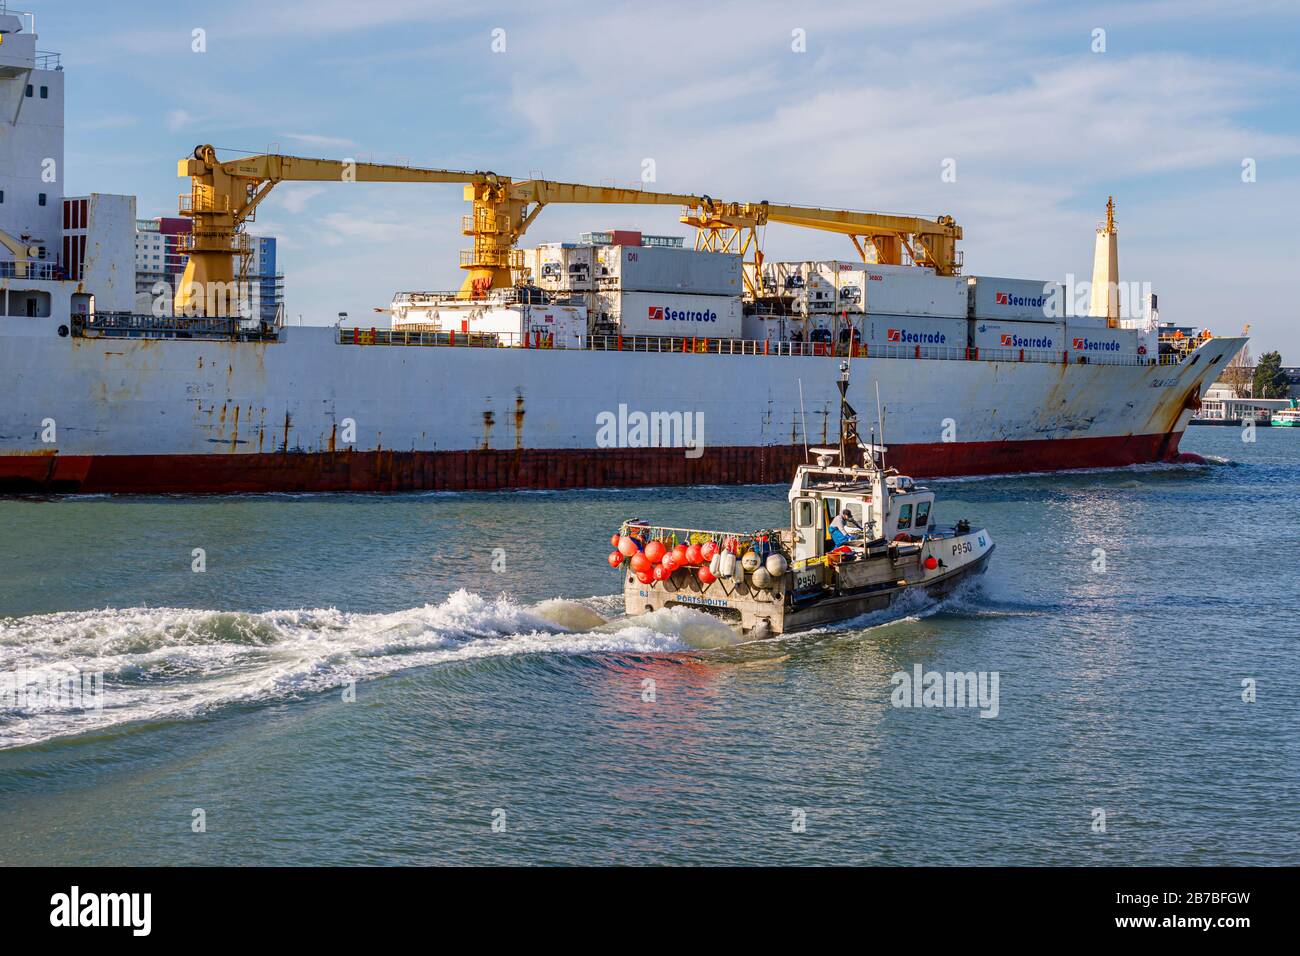 A small traditional fishing is dwarfed as it passes by a large container ship in Portsmouth Harbour, Portsmouth, Hampshire, south coast England Stock Photo